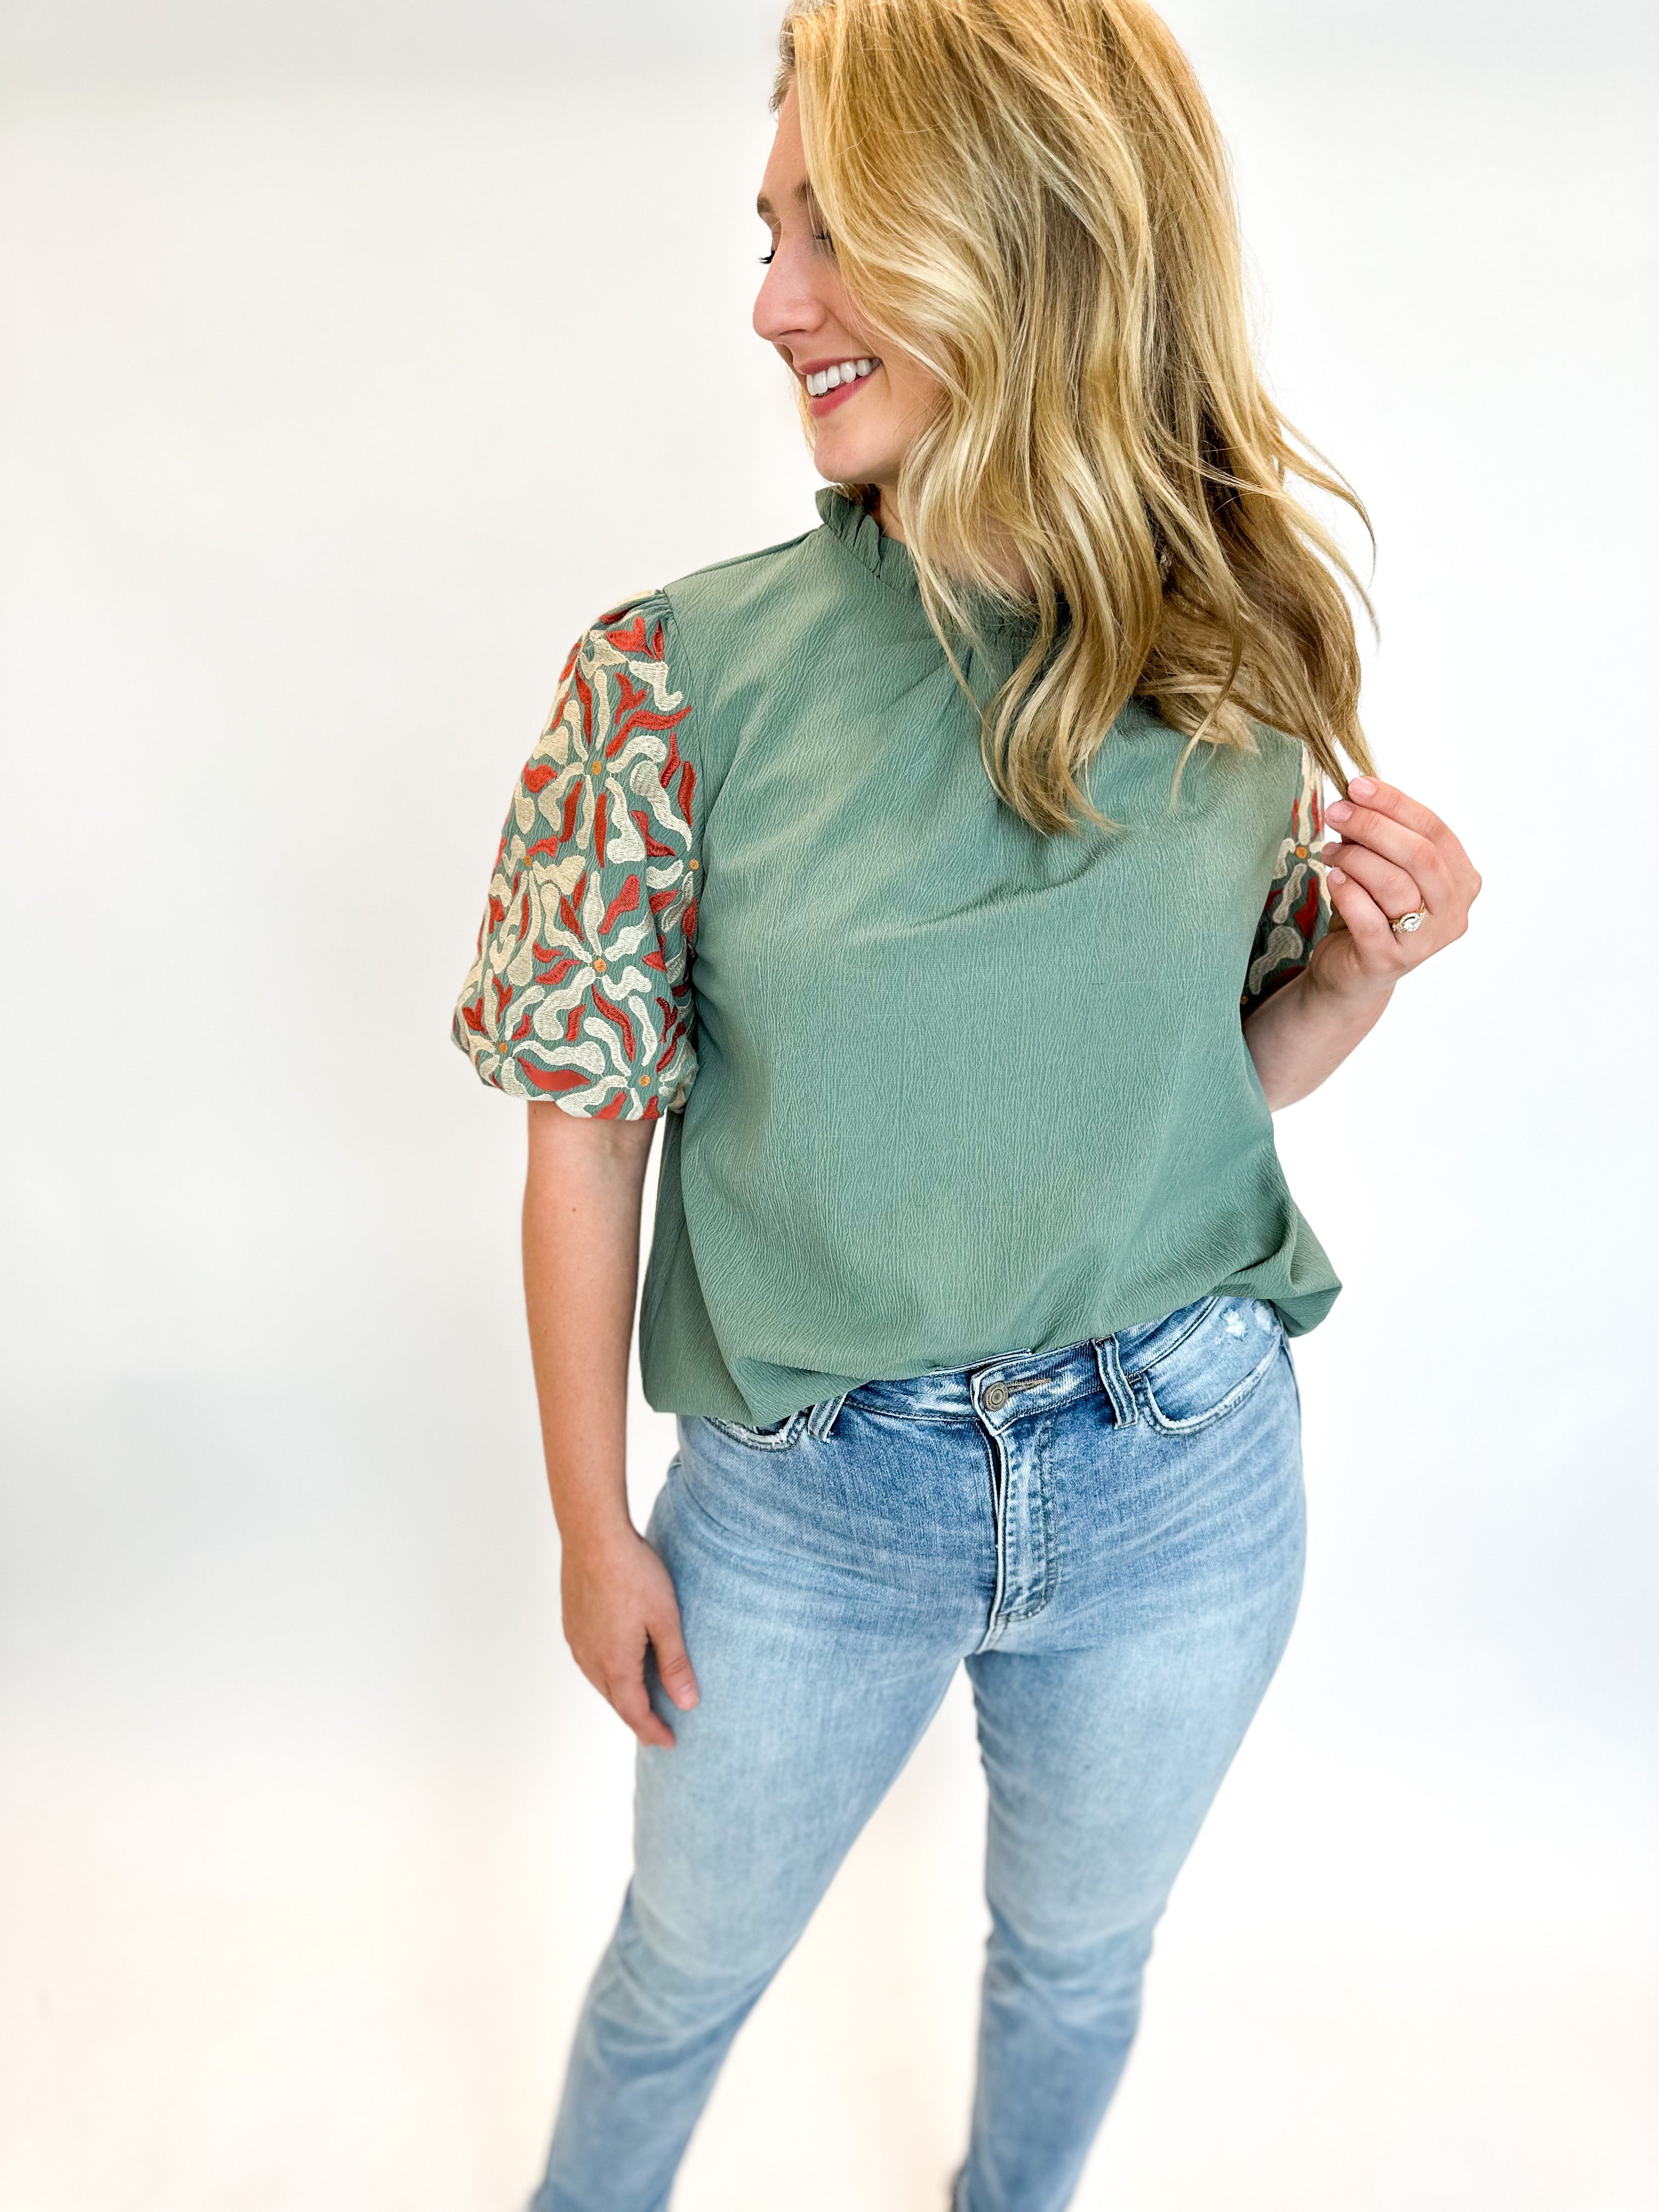 Fall Embroidered Blouse - Green-200 Fashion Blouses-ENTRO-July & June Women's Fashion Boutique Located in San Antonio, Texas